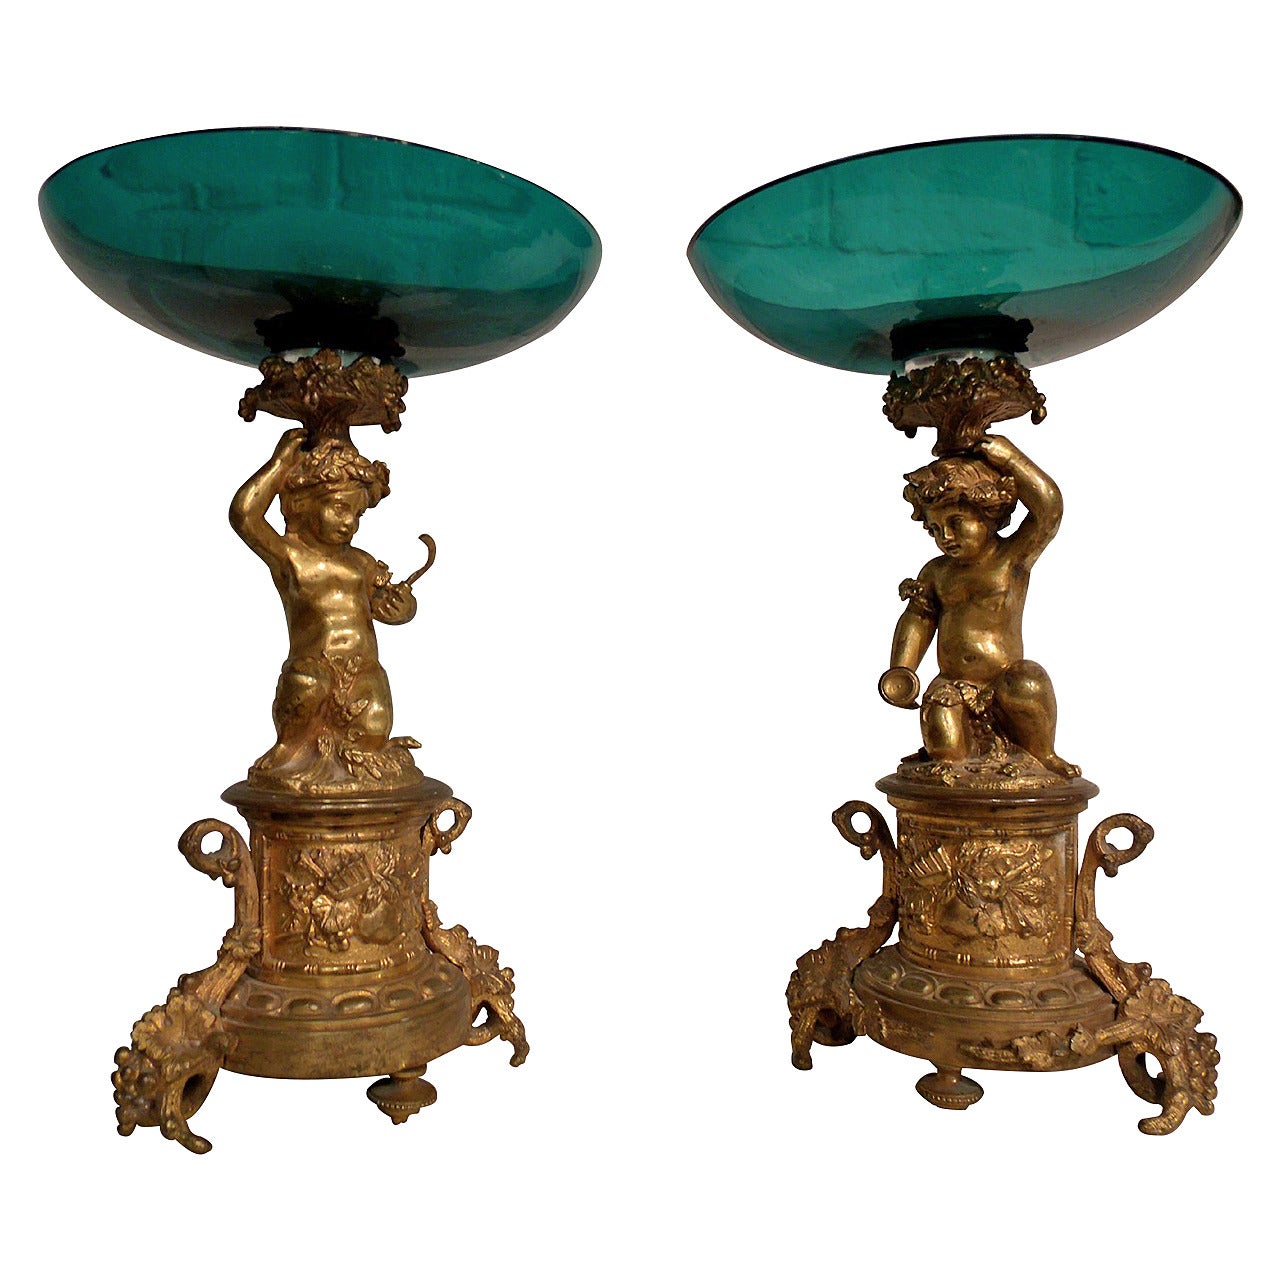 Pair of 19th Century French Ormolu and Glass Tazzas